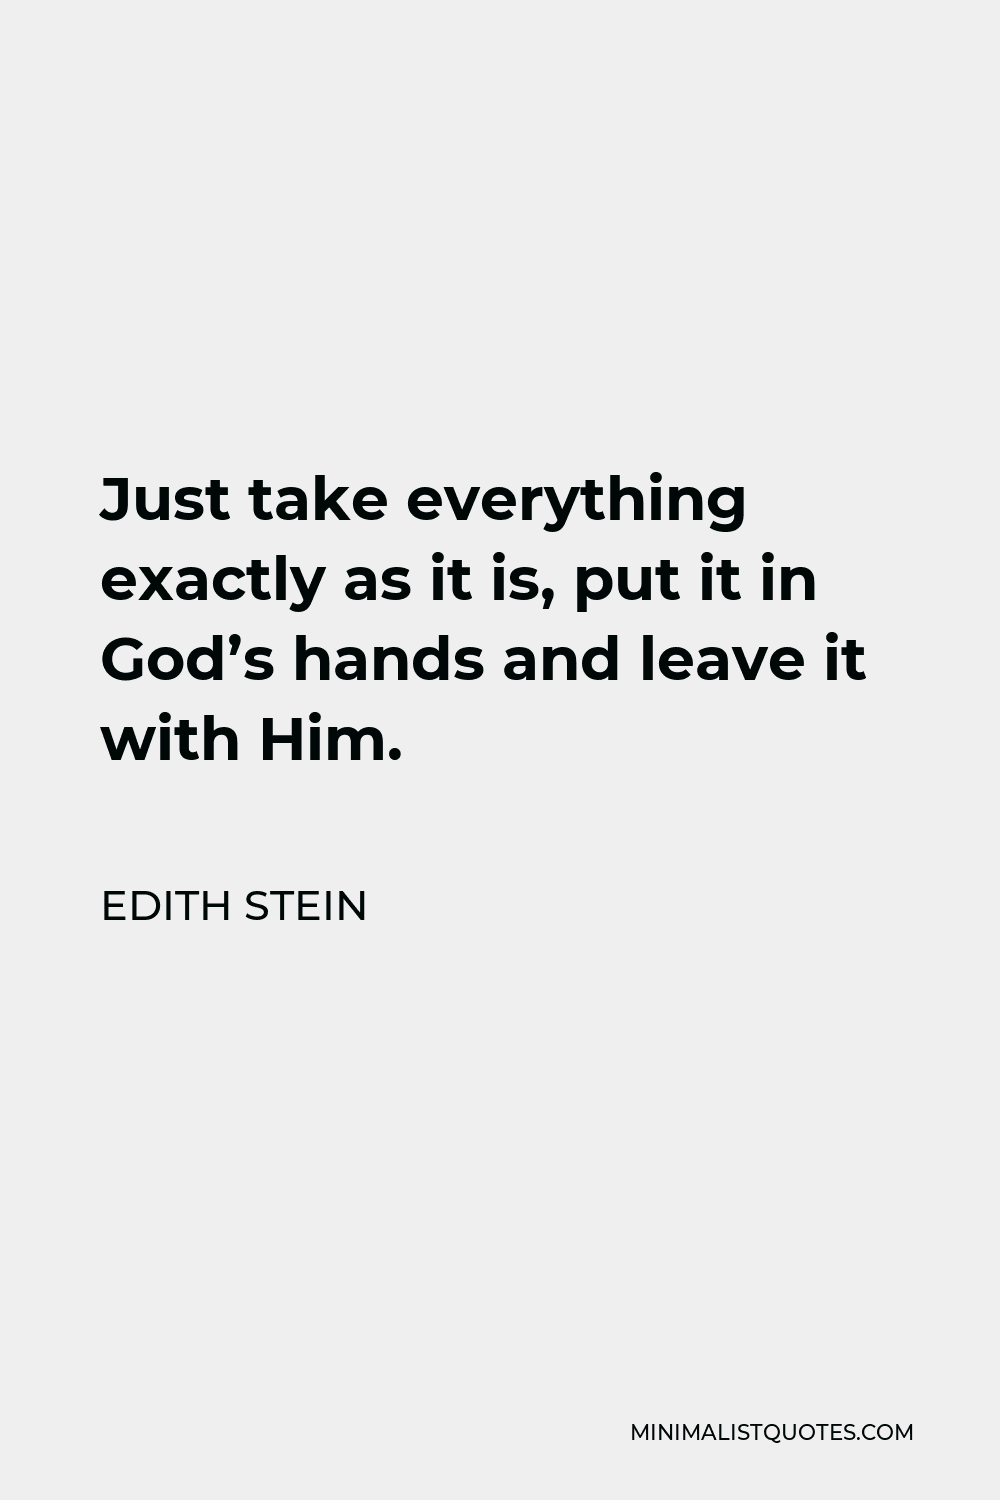 Edith Stein Quote - Just take everything exactly as it is, put it in God’s hands and leave it with Him.